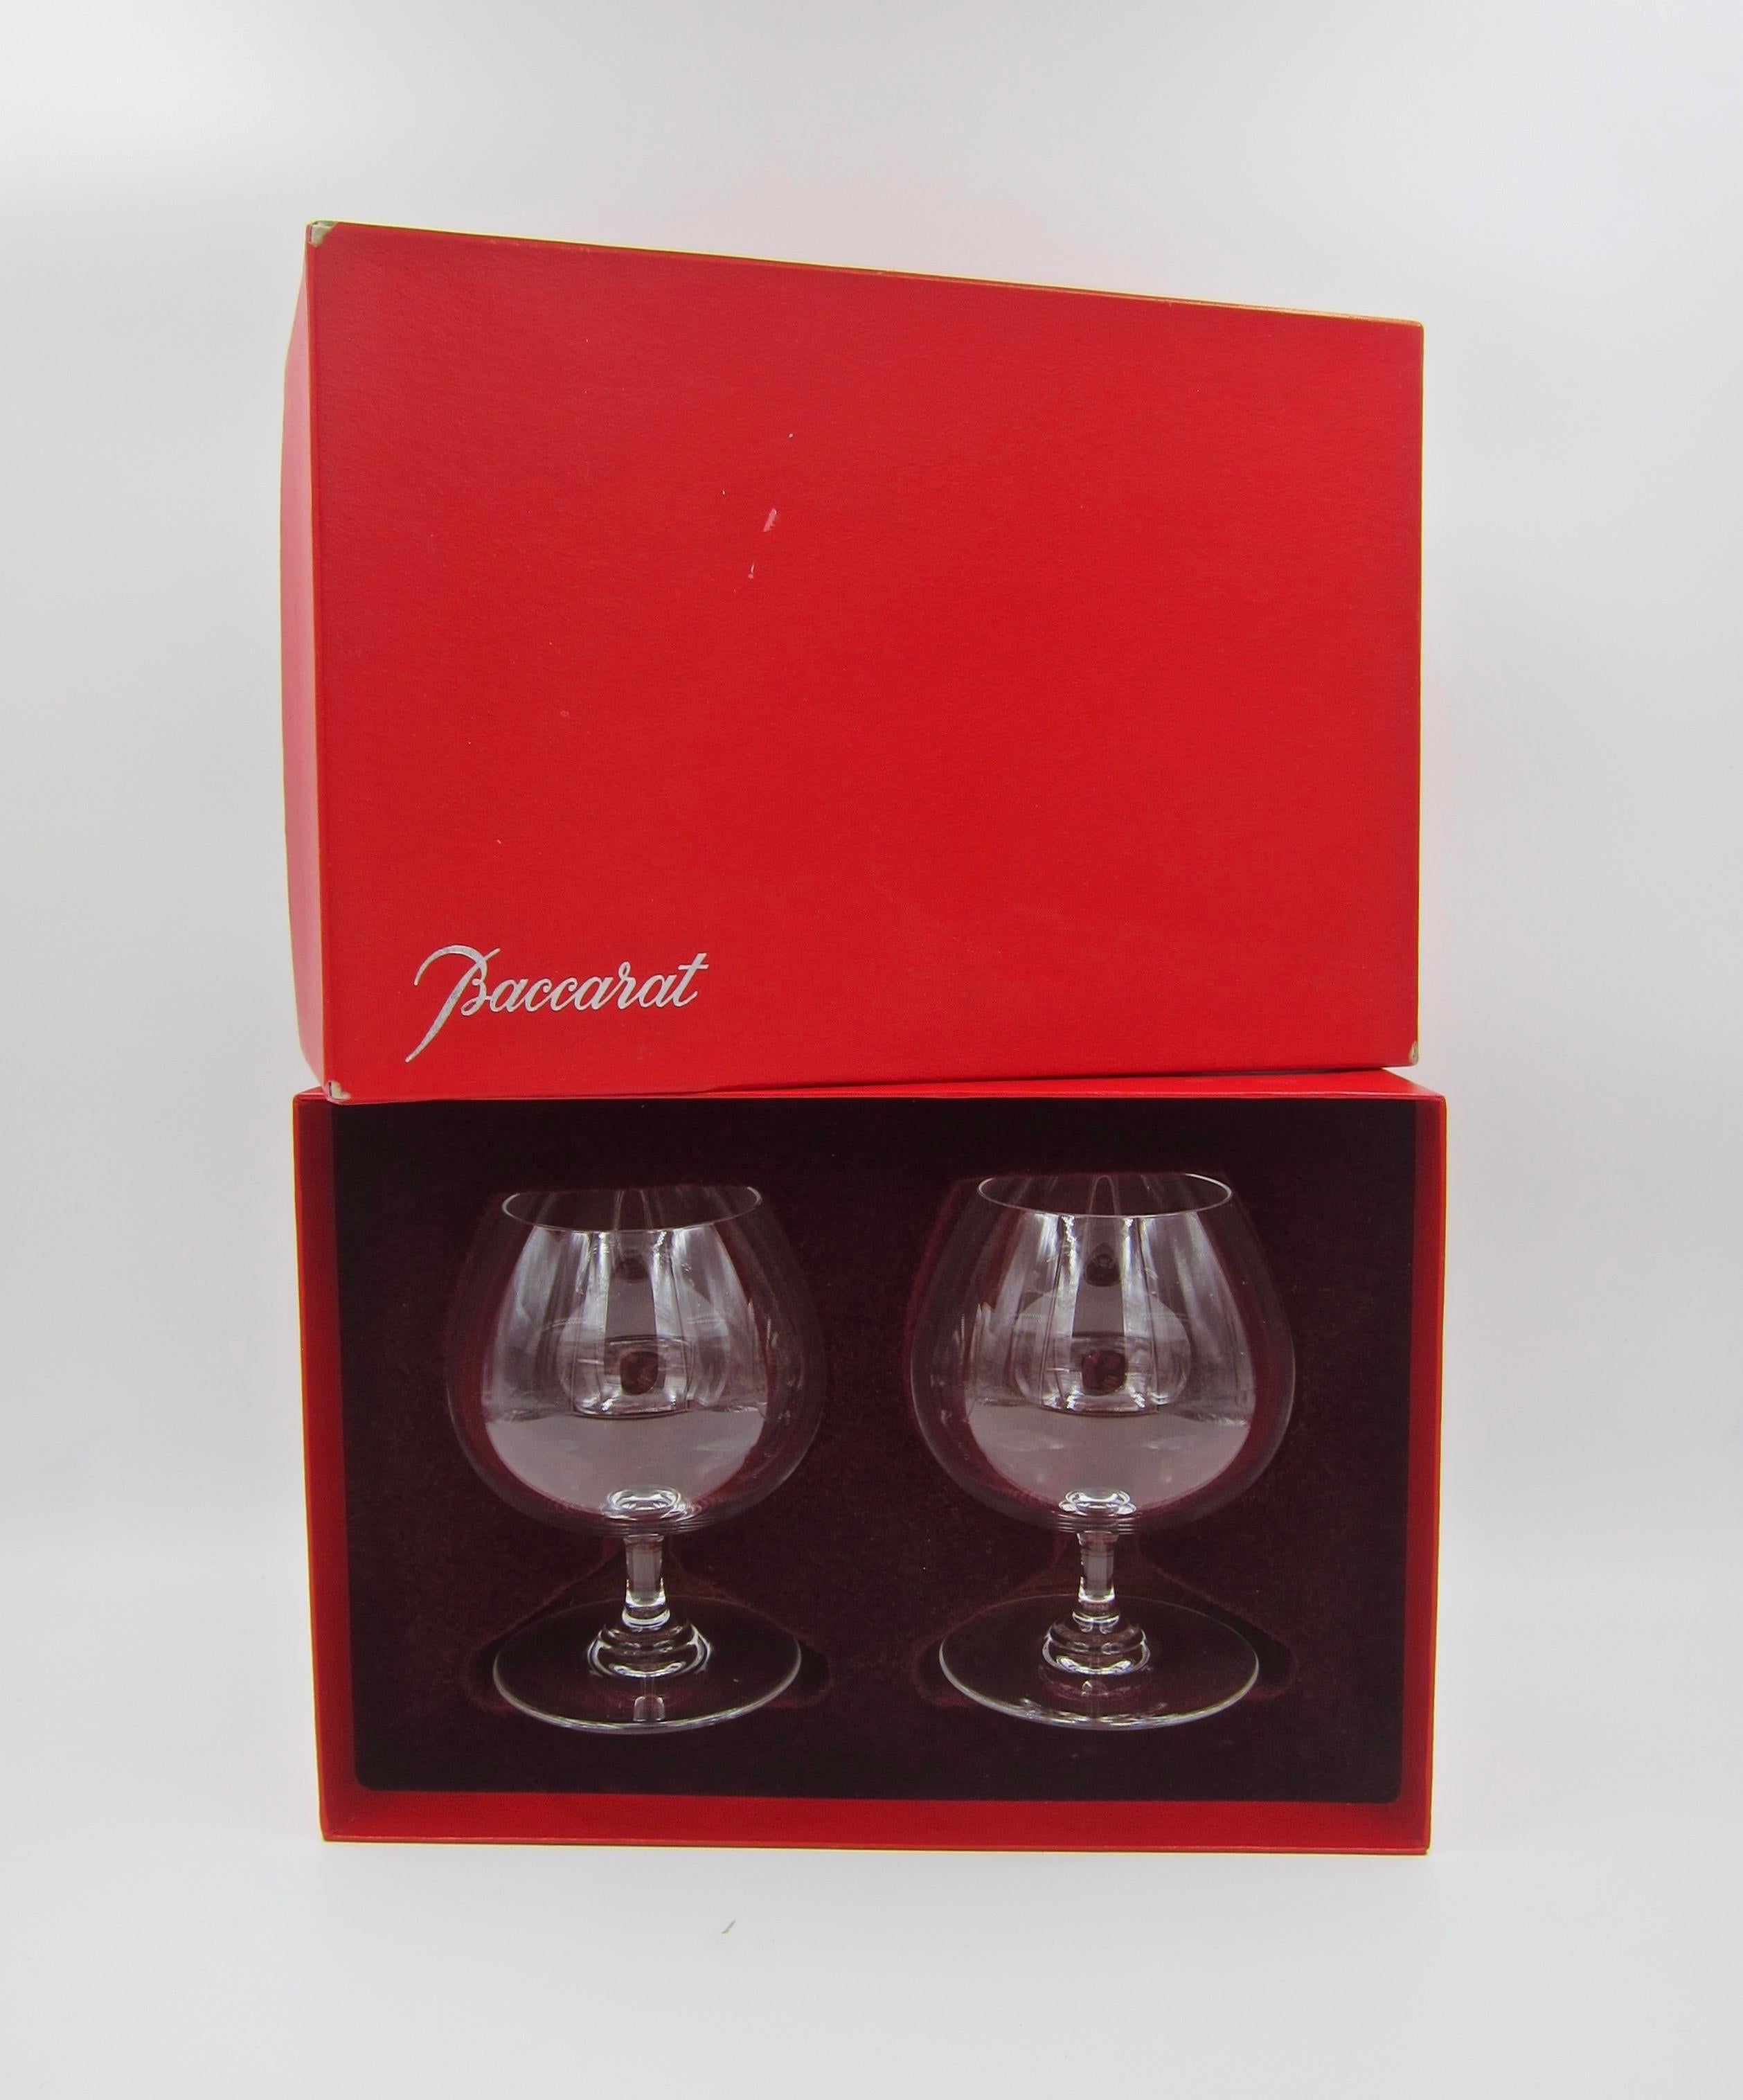 A boxed pair of handmade mouth-blown colorless crystal brandy snifters from France. From Baccarat's perfection line, each clear crystal glass is designed with a short stem and a wide balloon-like crystal bowl enabling scents and notes to be released